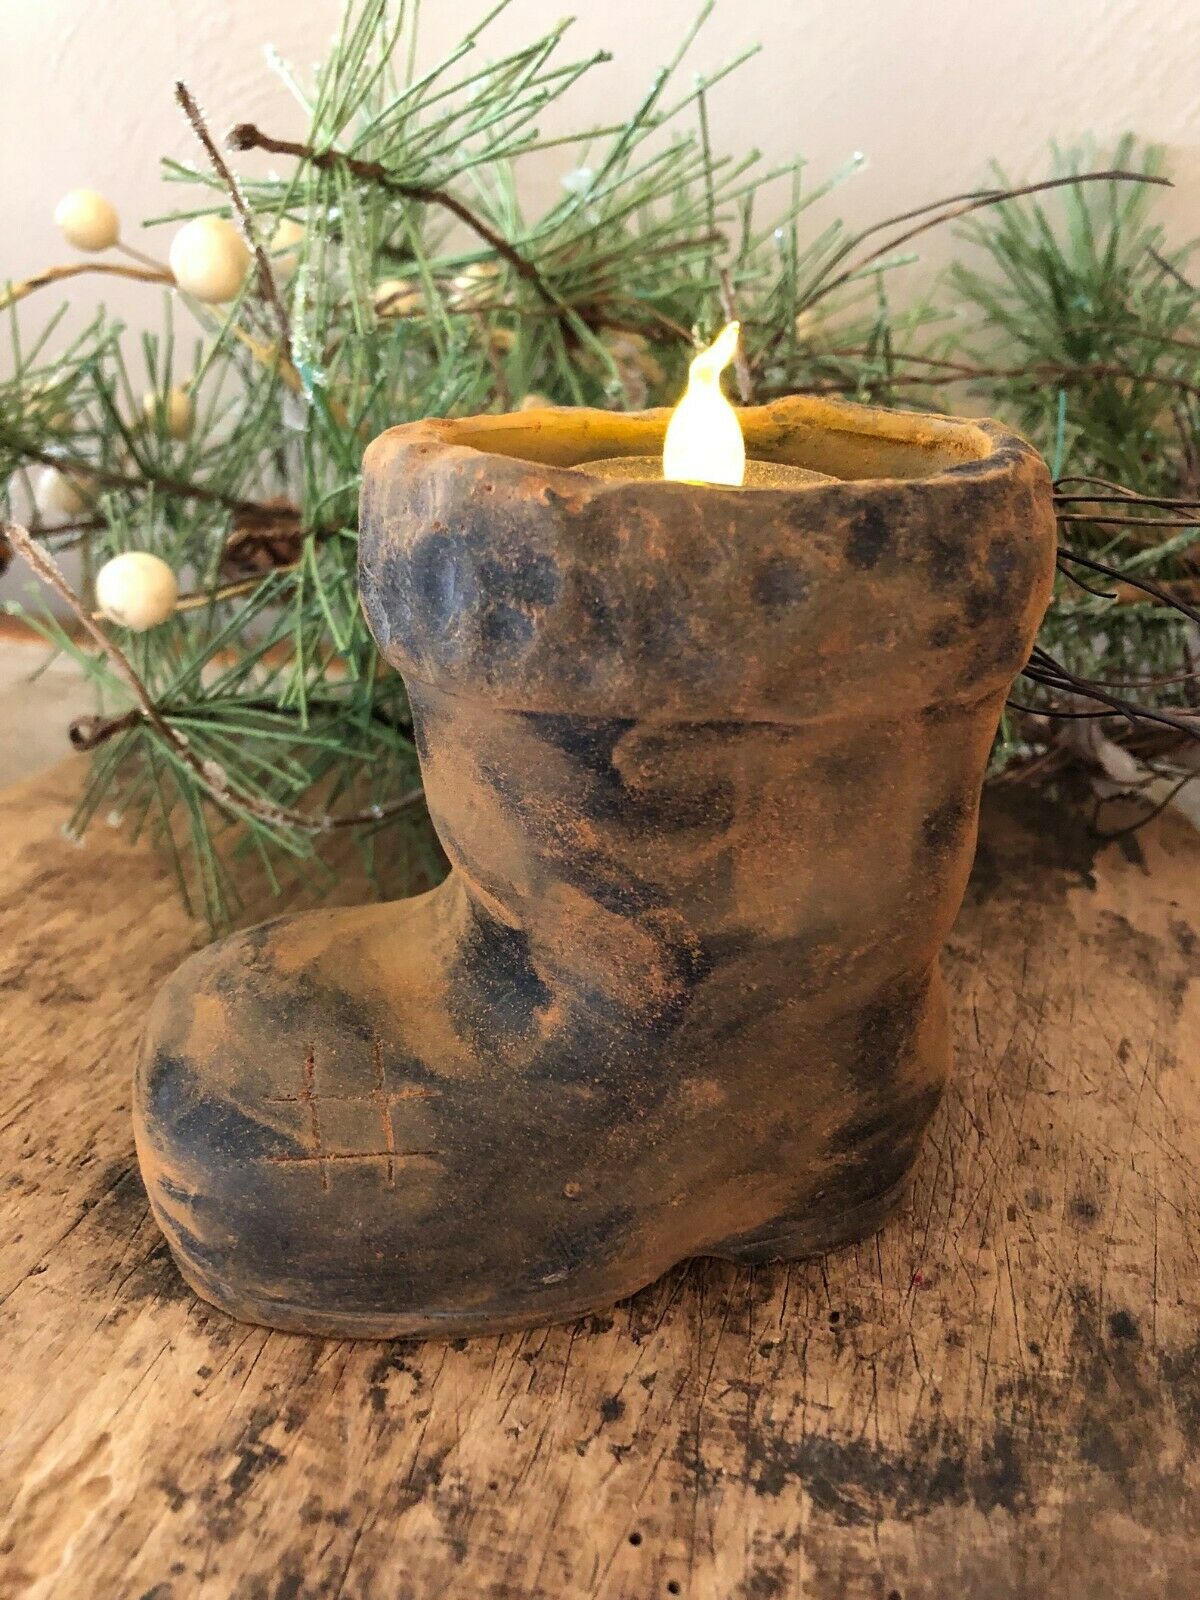 Primitive Christmas Blackened Beeswax Santa Boot Flicker Light - The Primitive Pineapple Collection